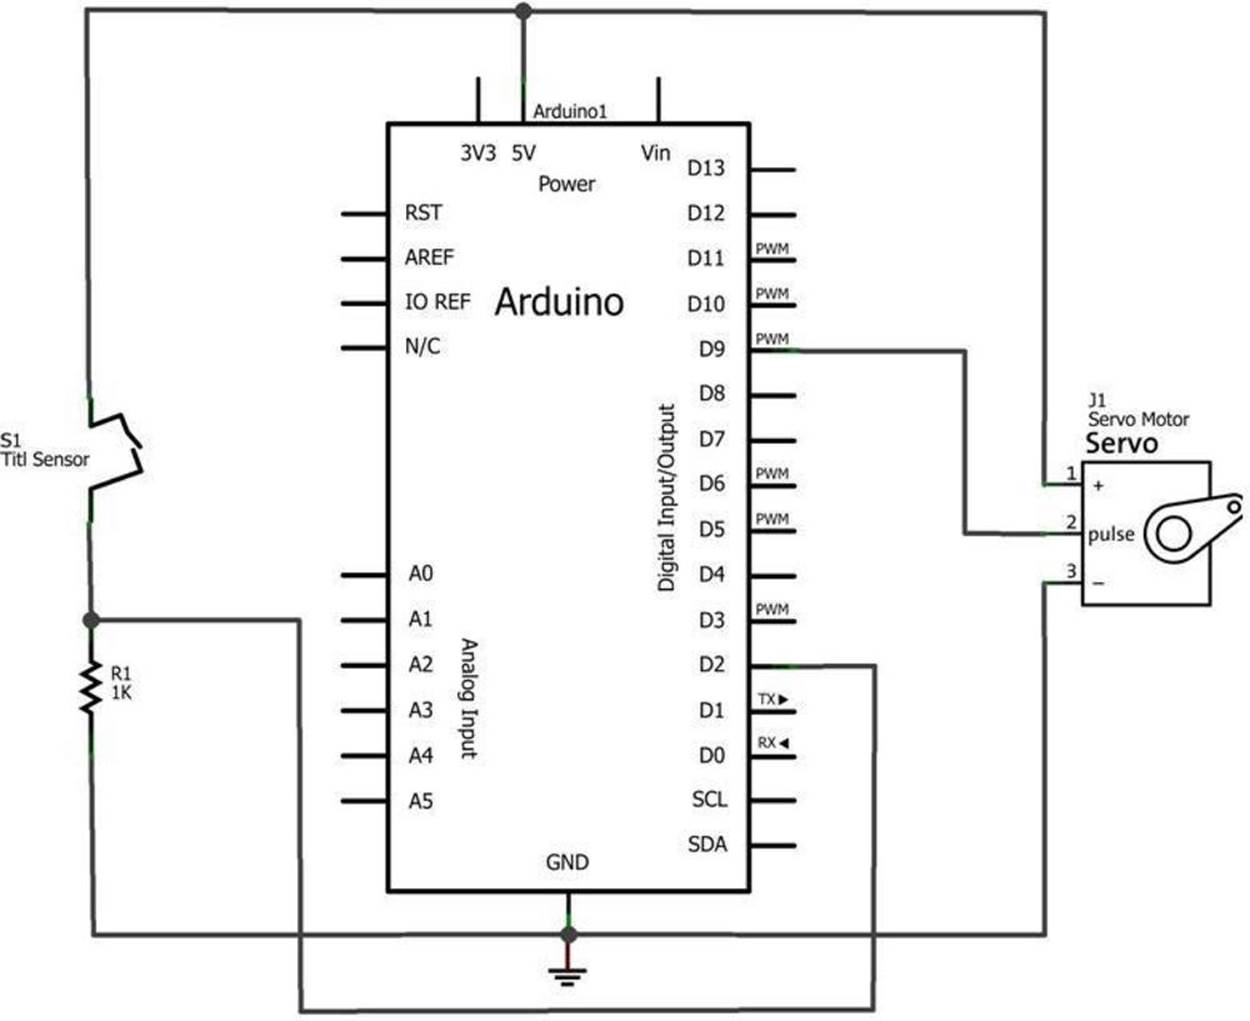 Tilt Sensing Servo Motor Controller circuit schematic diagram: orange wire (D9), red wire (+5V), and brown wire (GND)